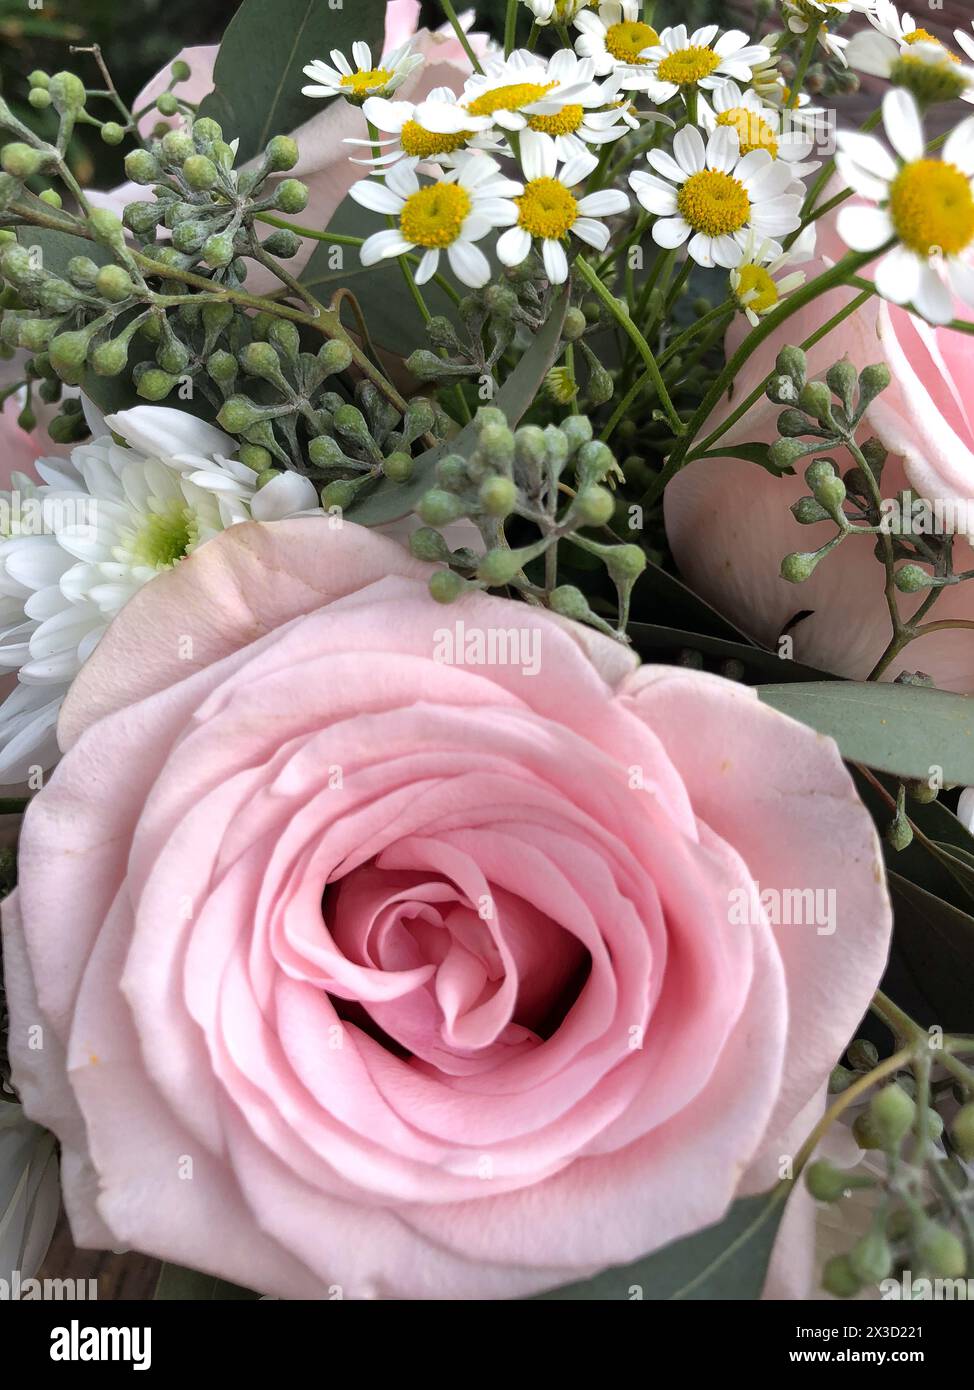 Pale pink rose with white daisies and greenery Stock Photo